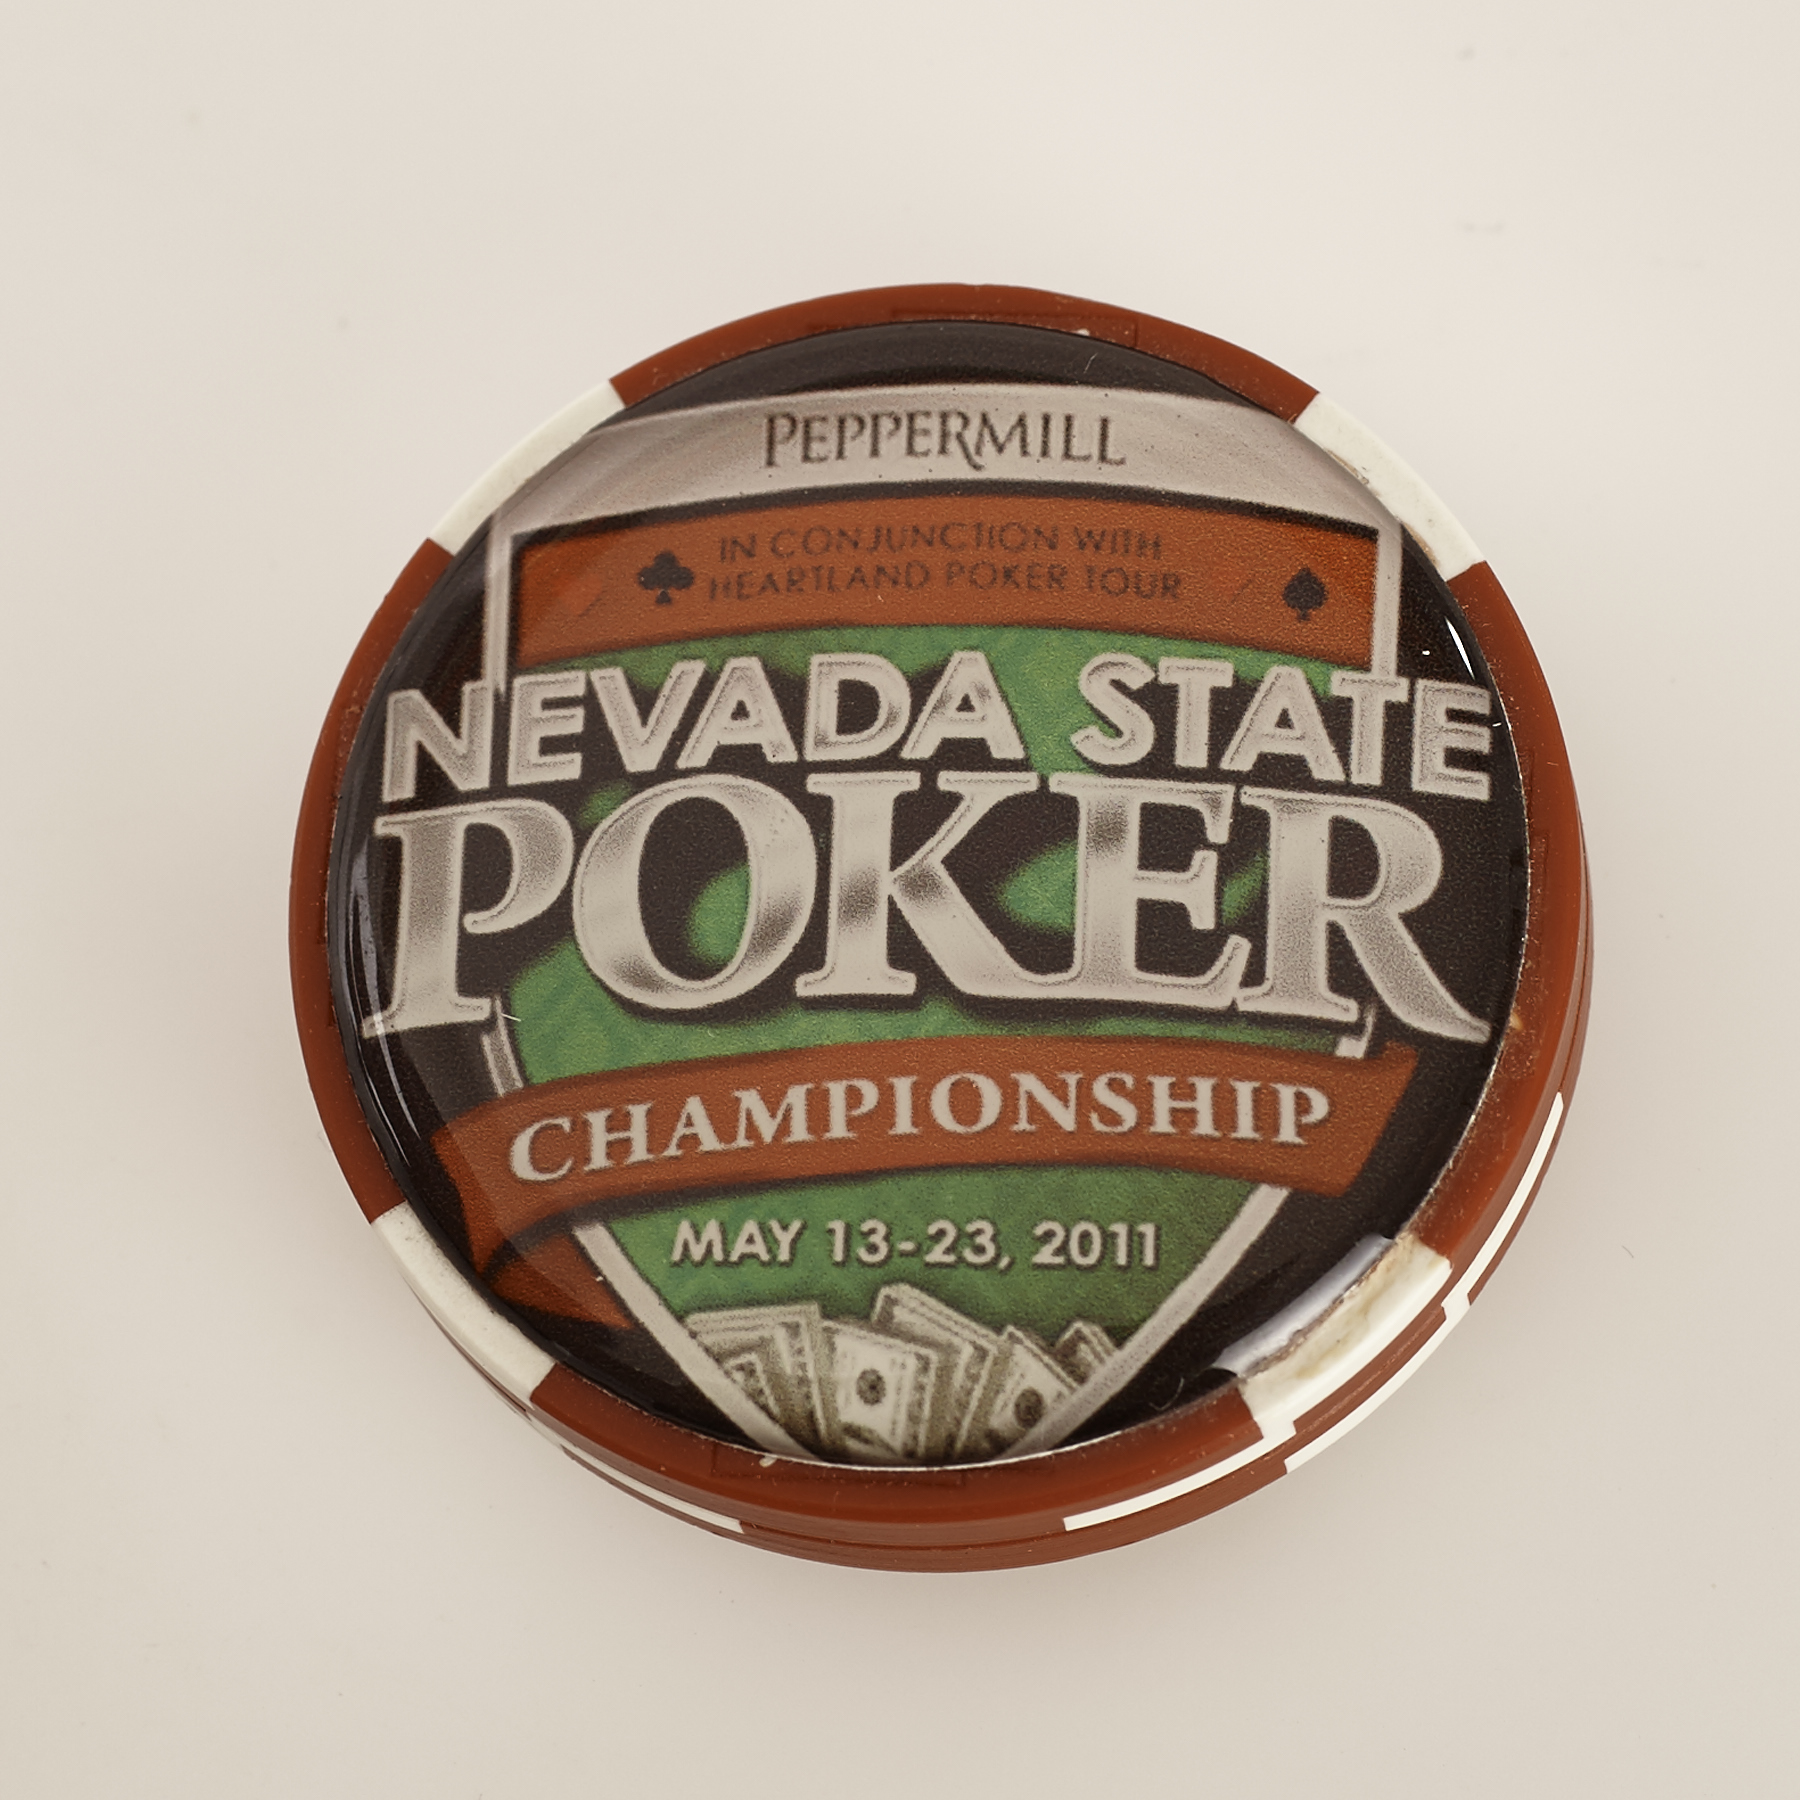 PEPPERMILL NEVADA STATE POKER CHAMPIONSHIP 2011, Card Guard